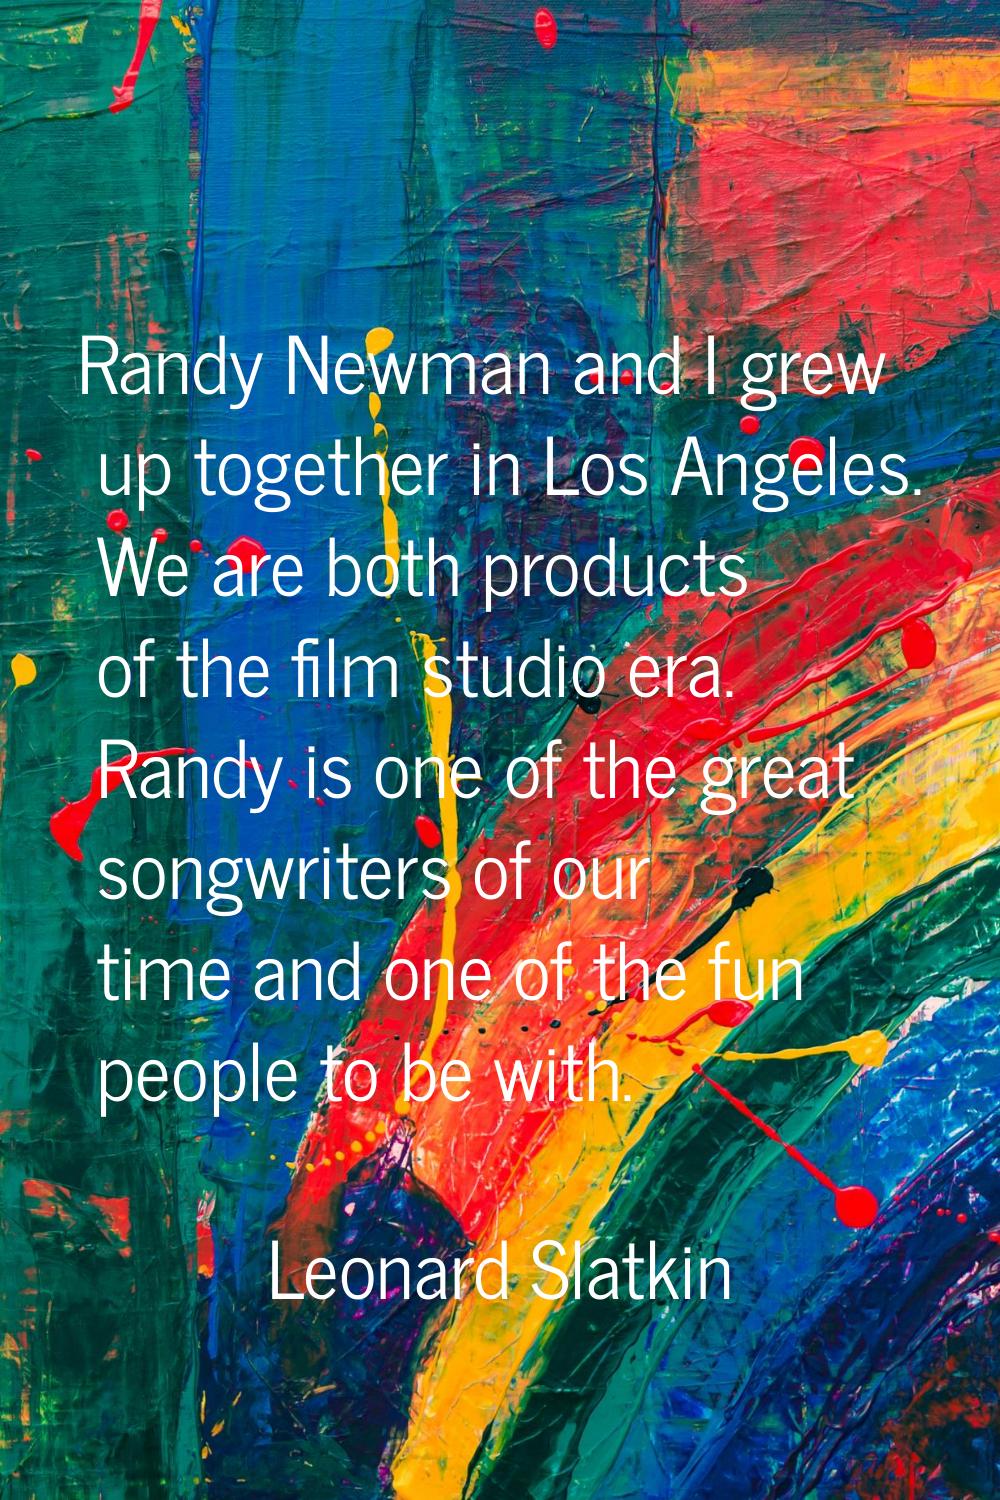 Randy Newman and I grew up together in Los Angeles. We are both products of the film studio era. Ra